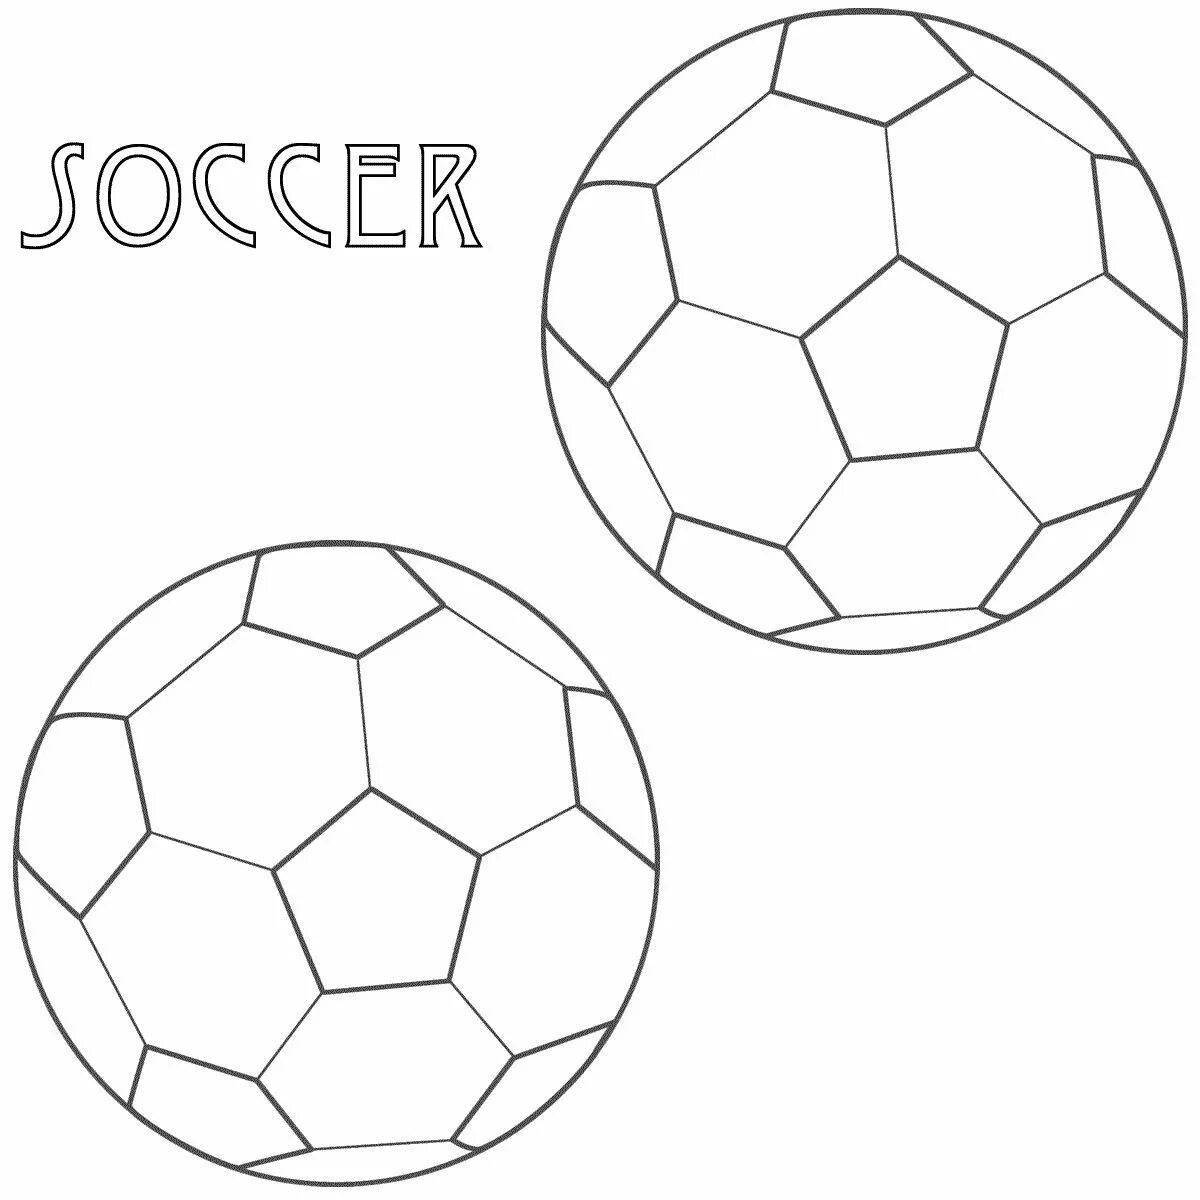 Creative football coloring book for kids